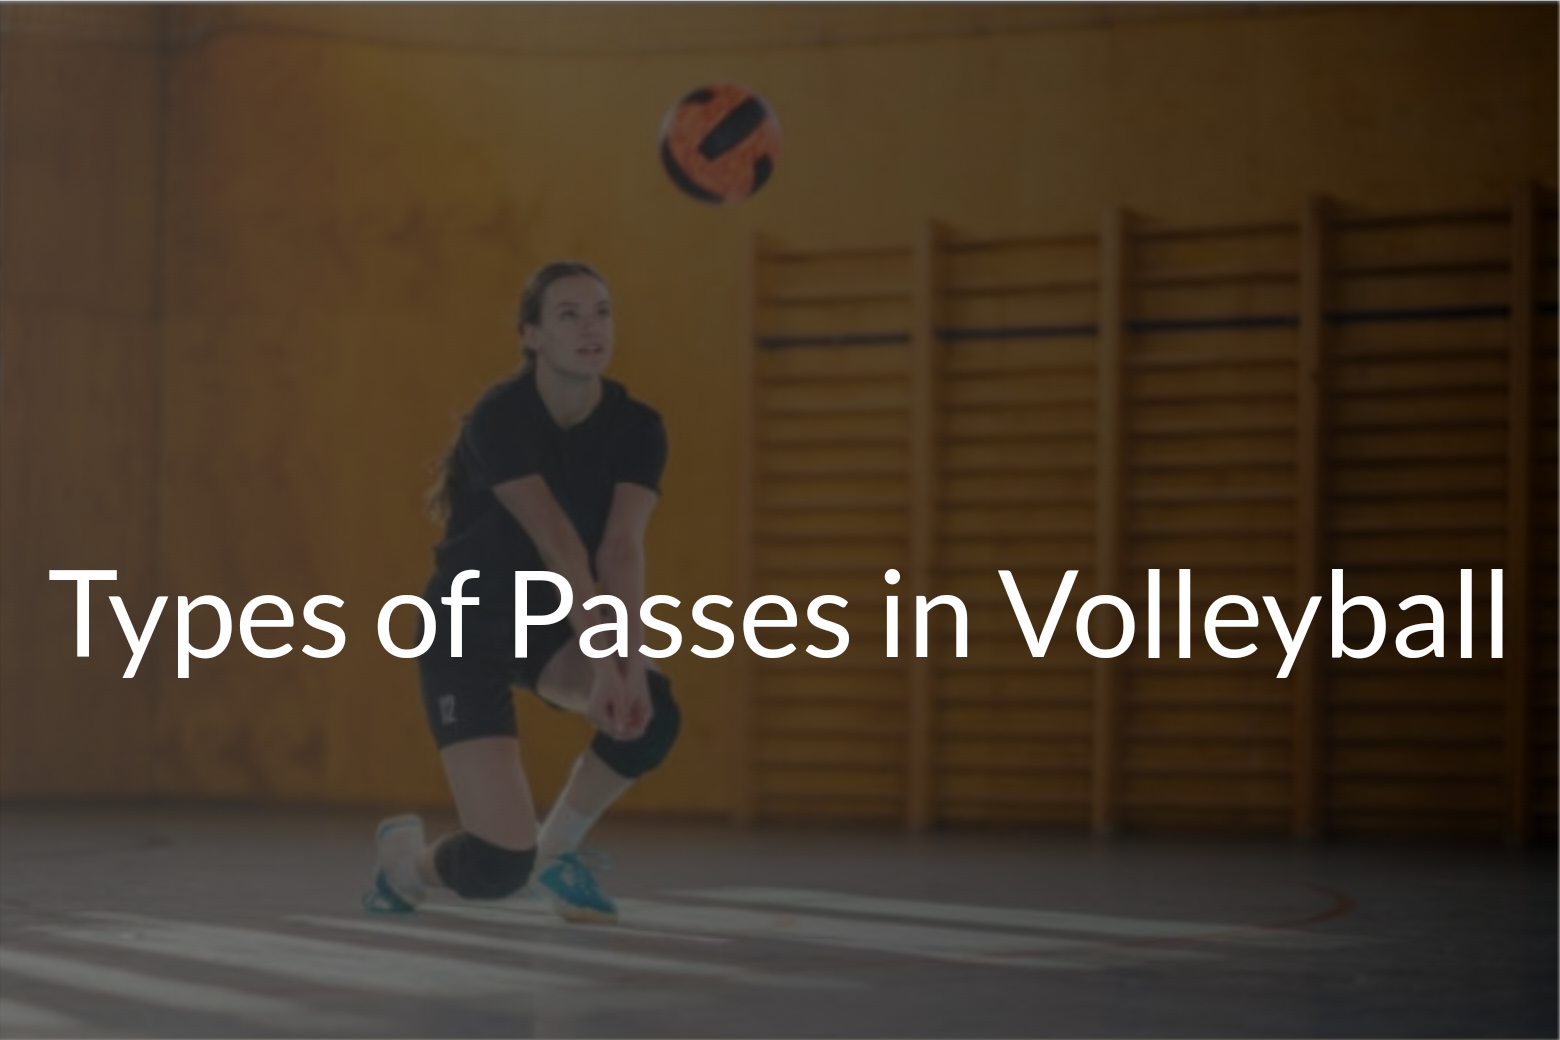 Types of passes in volleyball